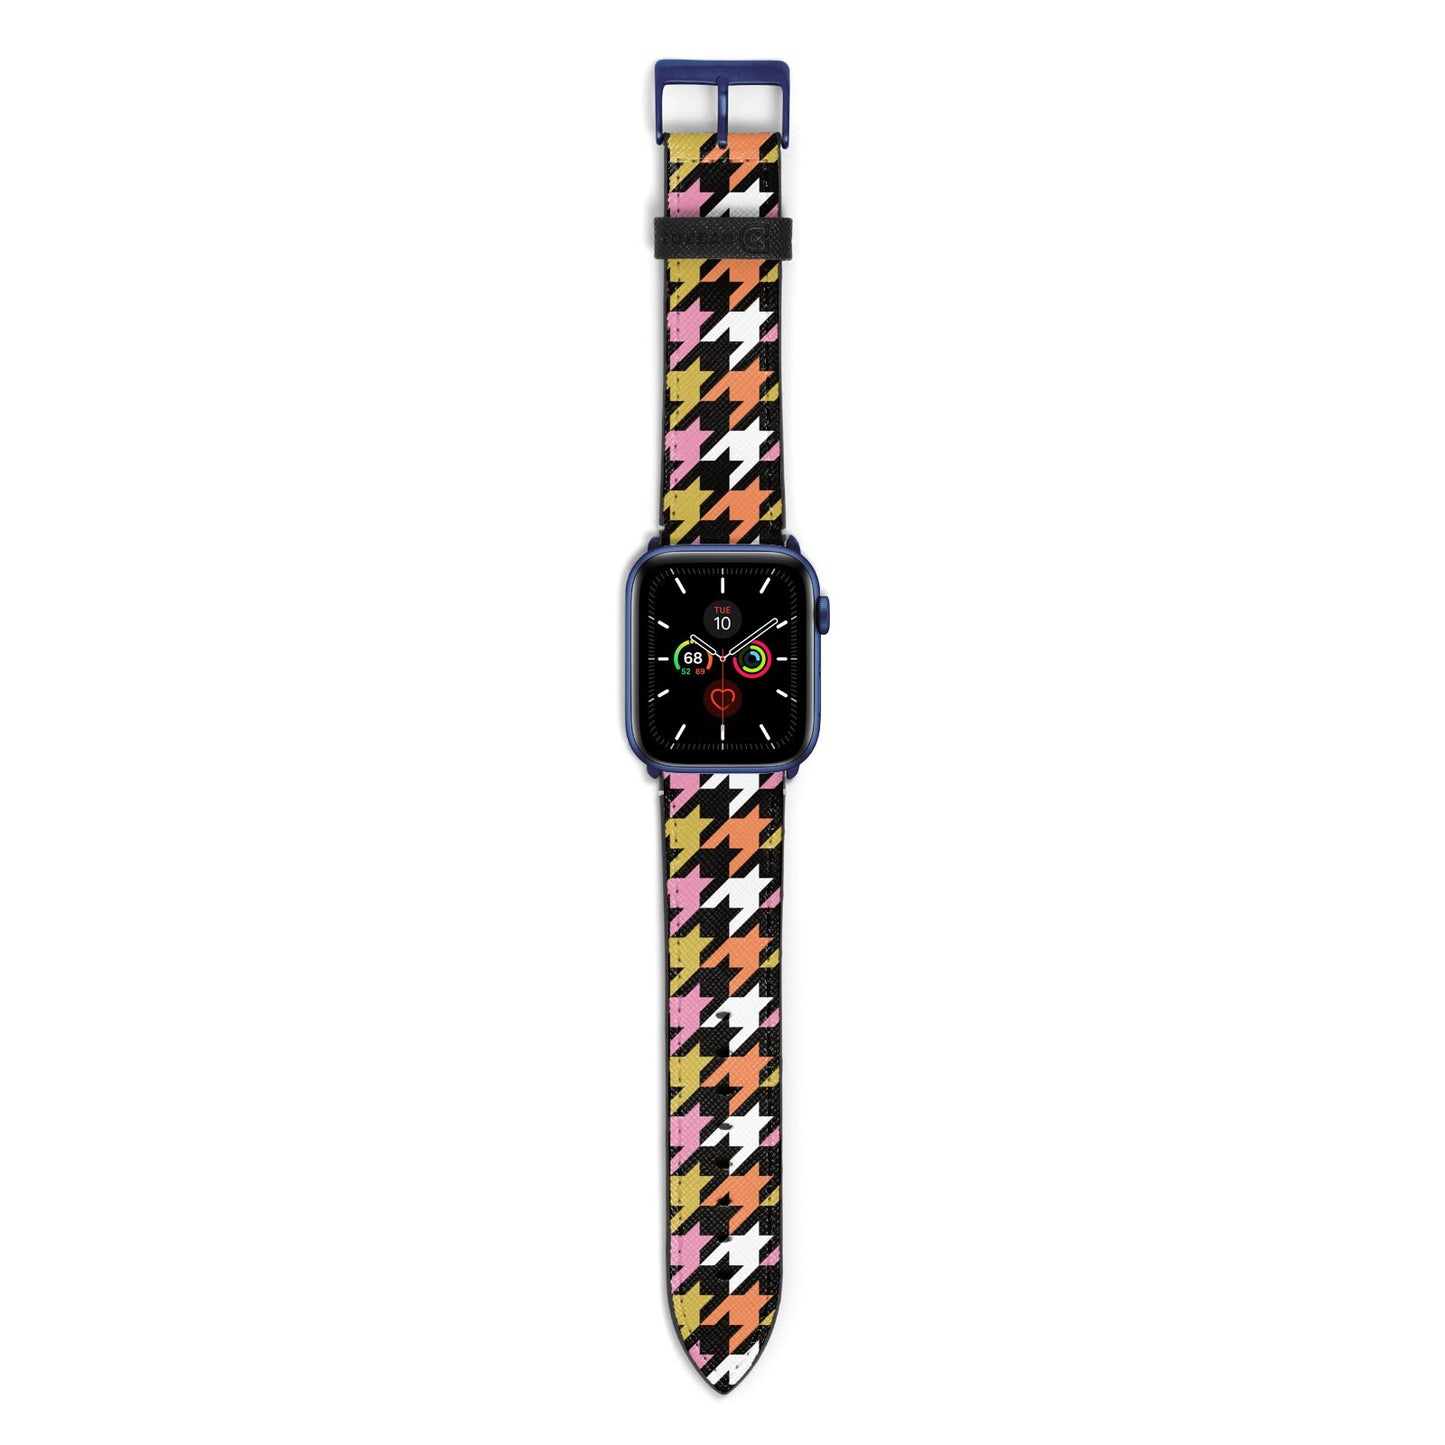 Retro Houndstooth Apple Watch Strap with Blue Hardware